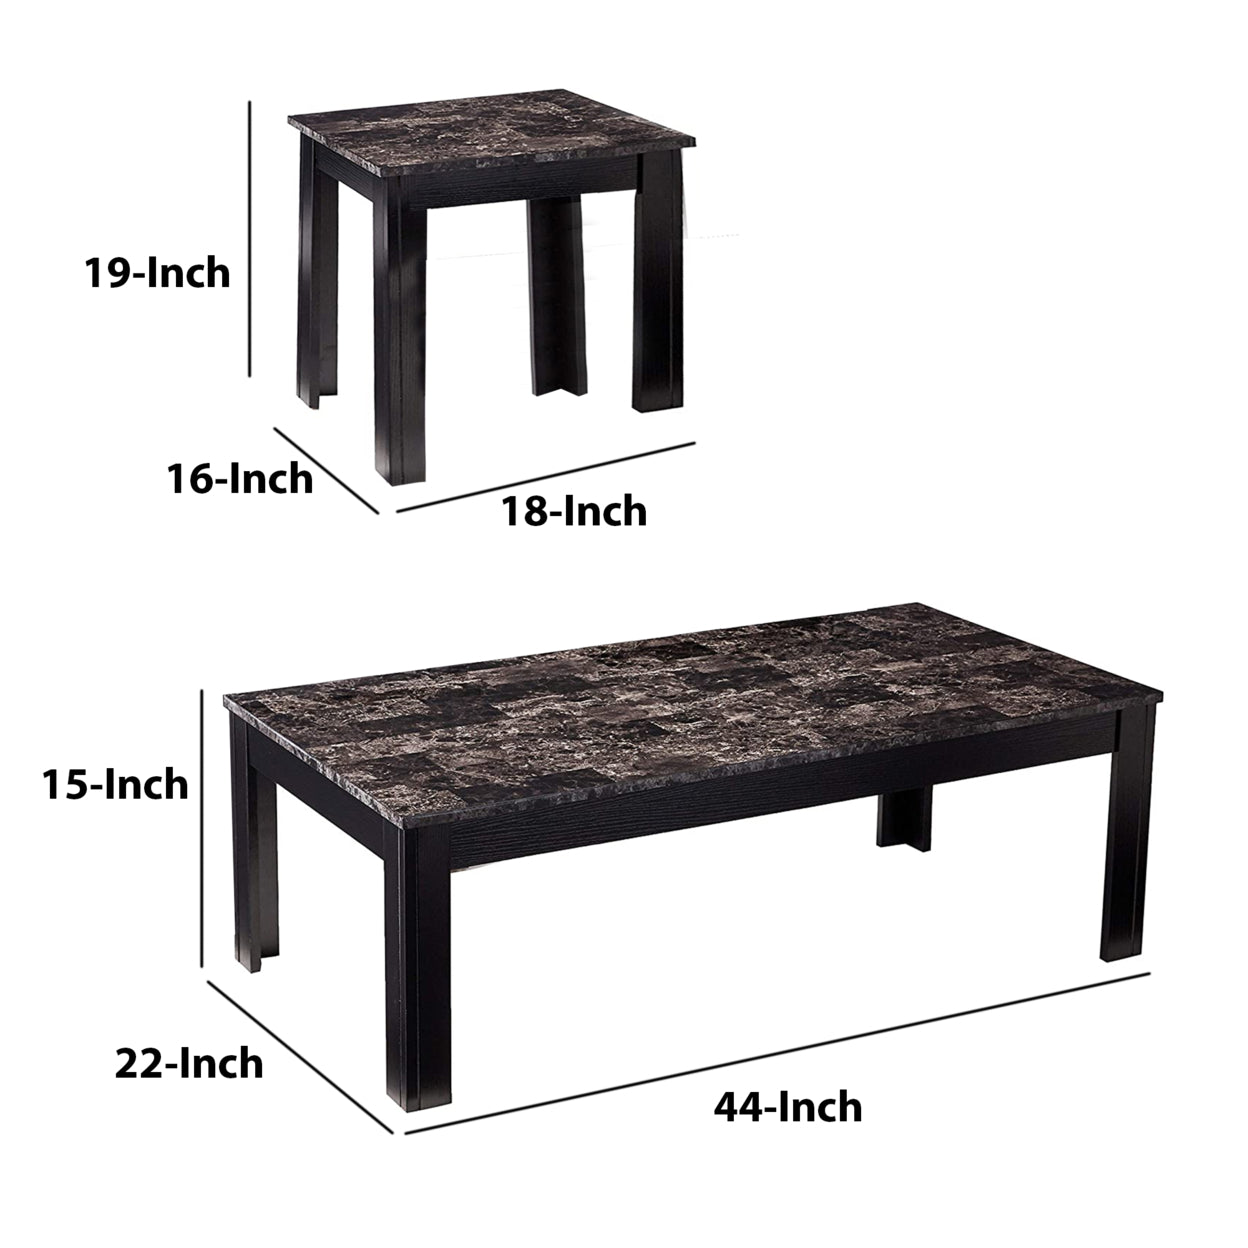 3-piece Faux-marble Top Occasional Table Set Black